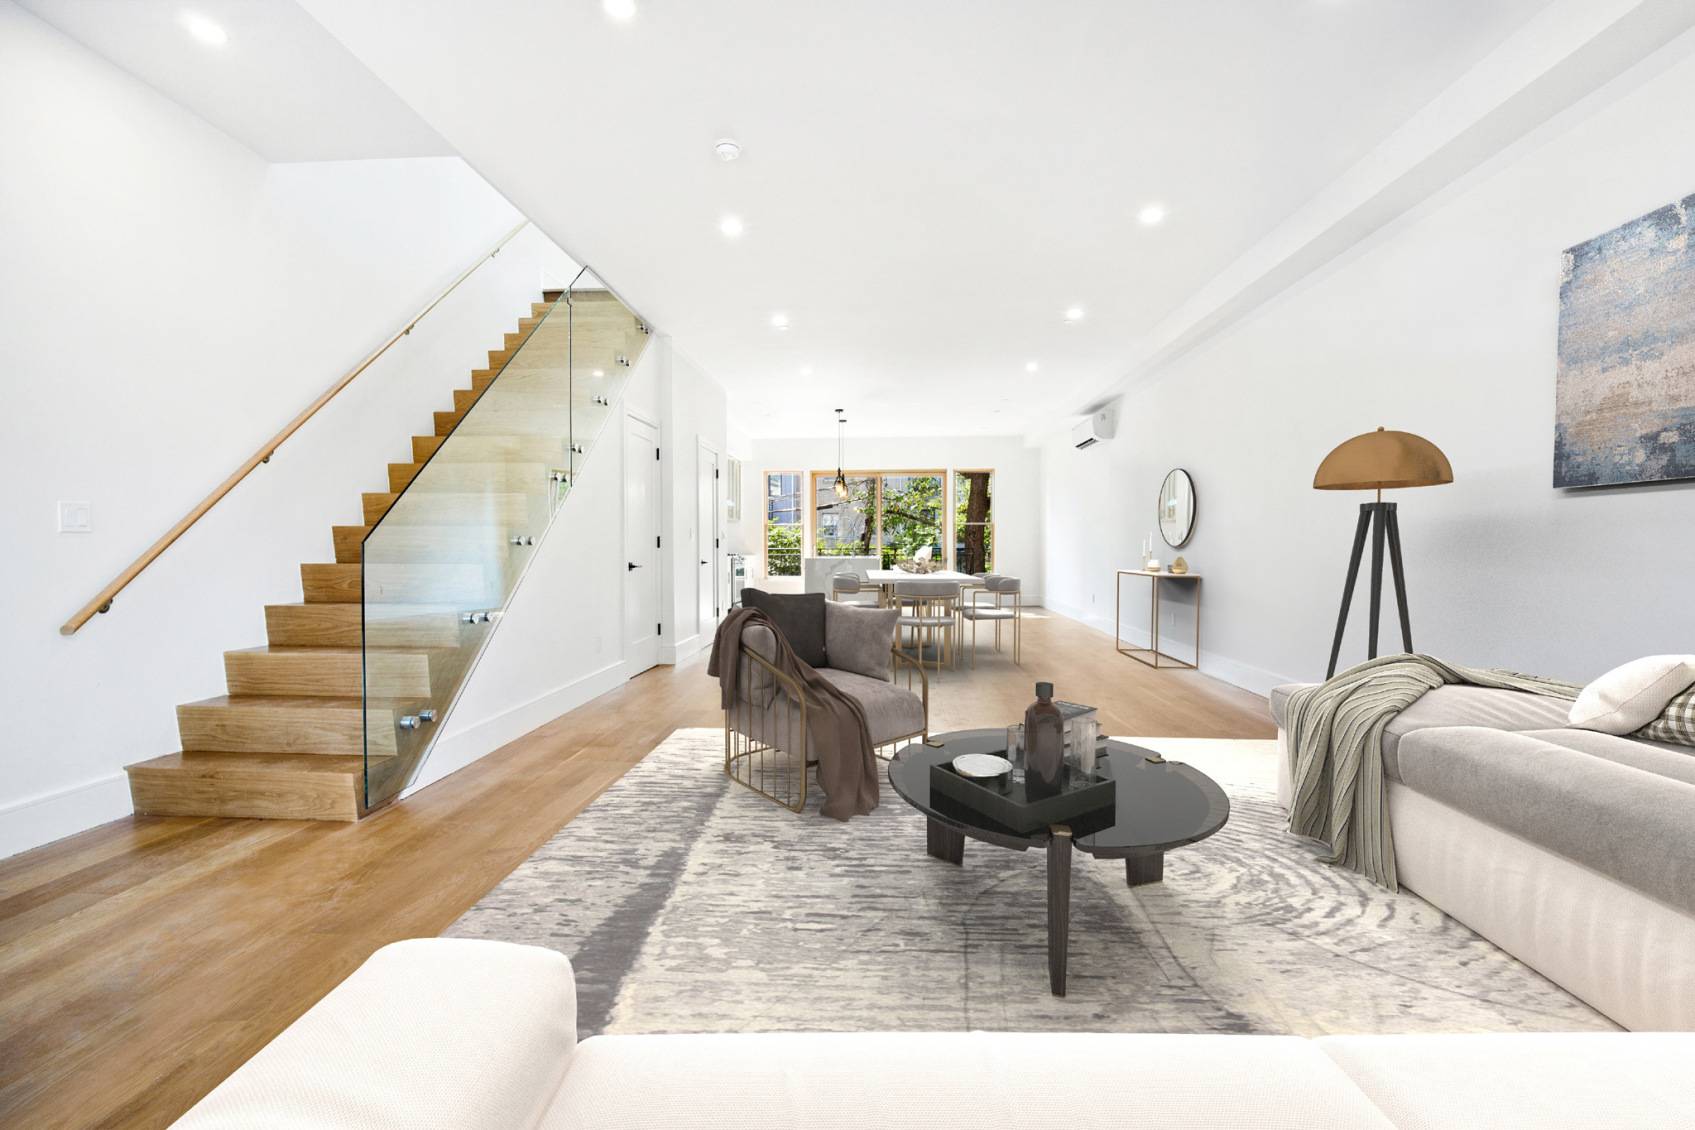 Developed by a notable and respected apartment builder in Brooklyn, this meticulously renovated two family townhouse in super cool and trendy Bushwick, features exquisitely designed modern interiors and the utmost ...